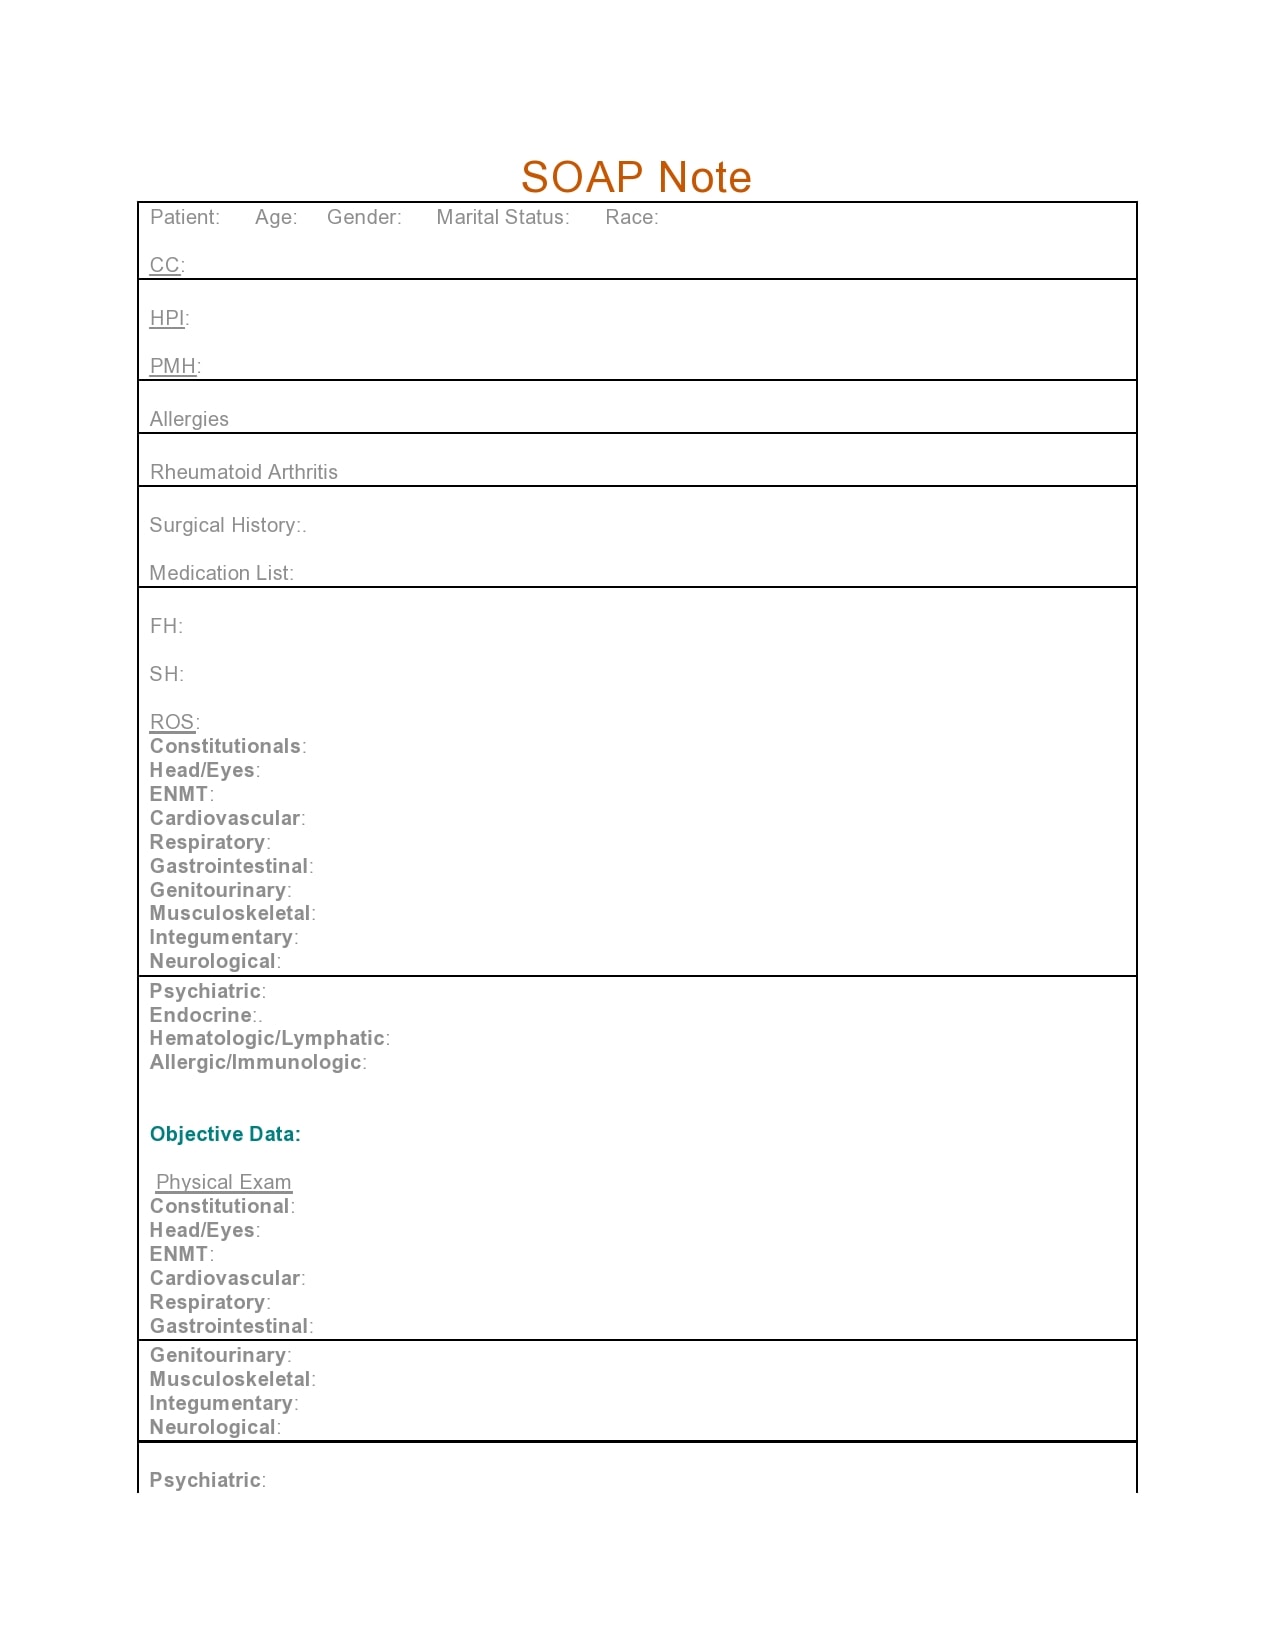 22 Blank SOAP Note Templates (+Examples) - TemplateArchive Inside Blank Soap Note Template